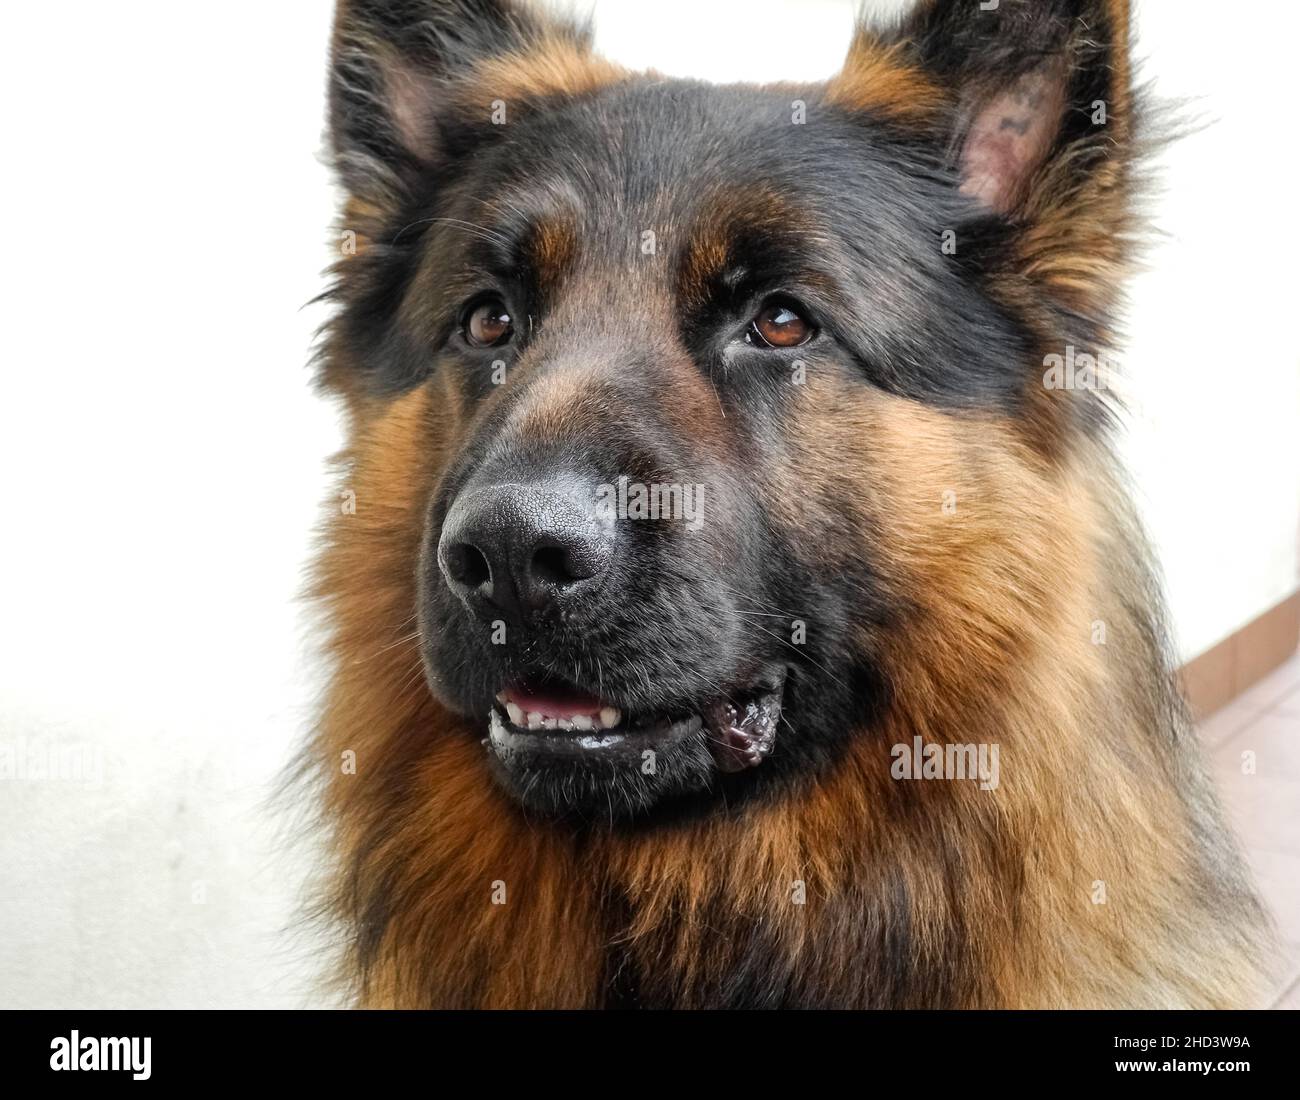 Male German Shepherd dog with black mask fur and tan coat, front view portrait (Canis familiaris) Stock Photo